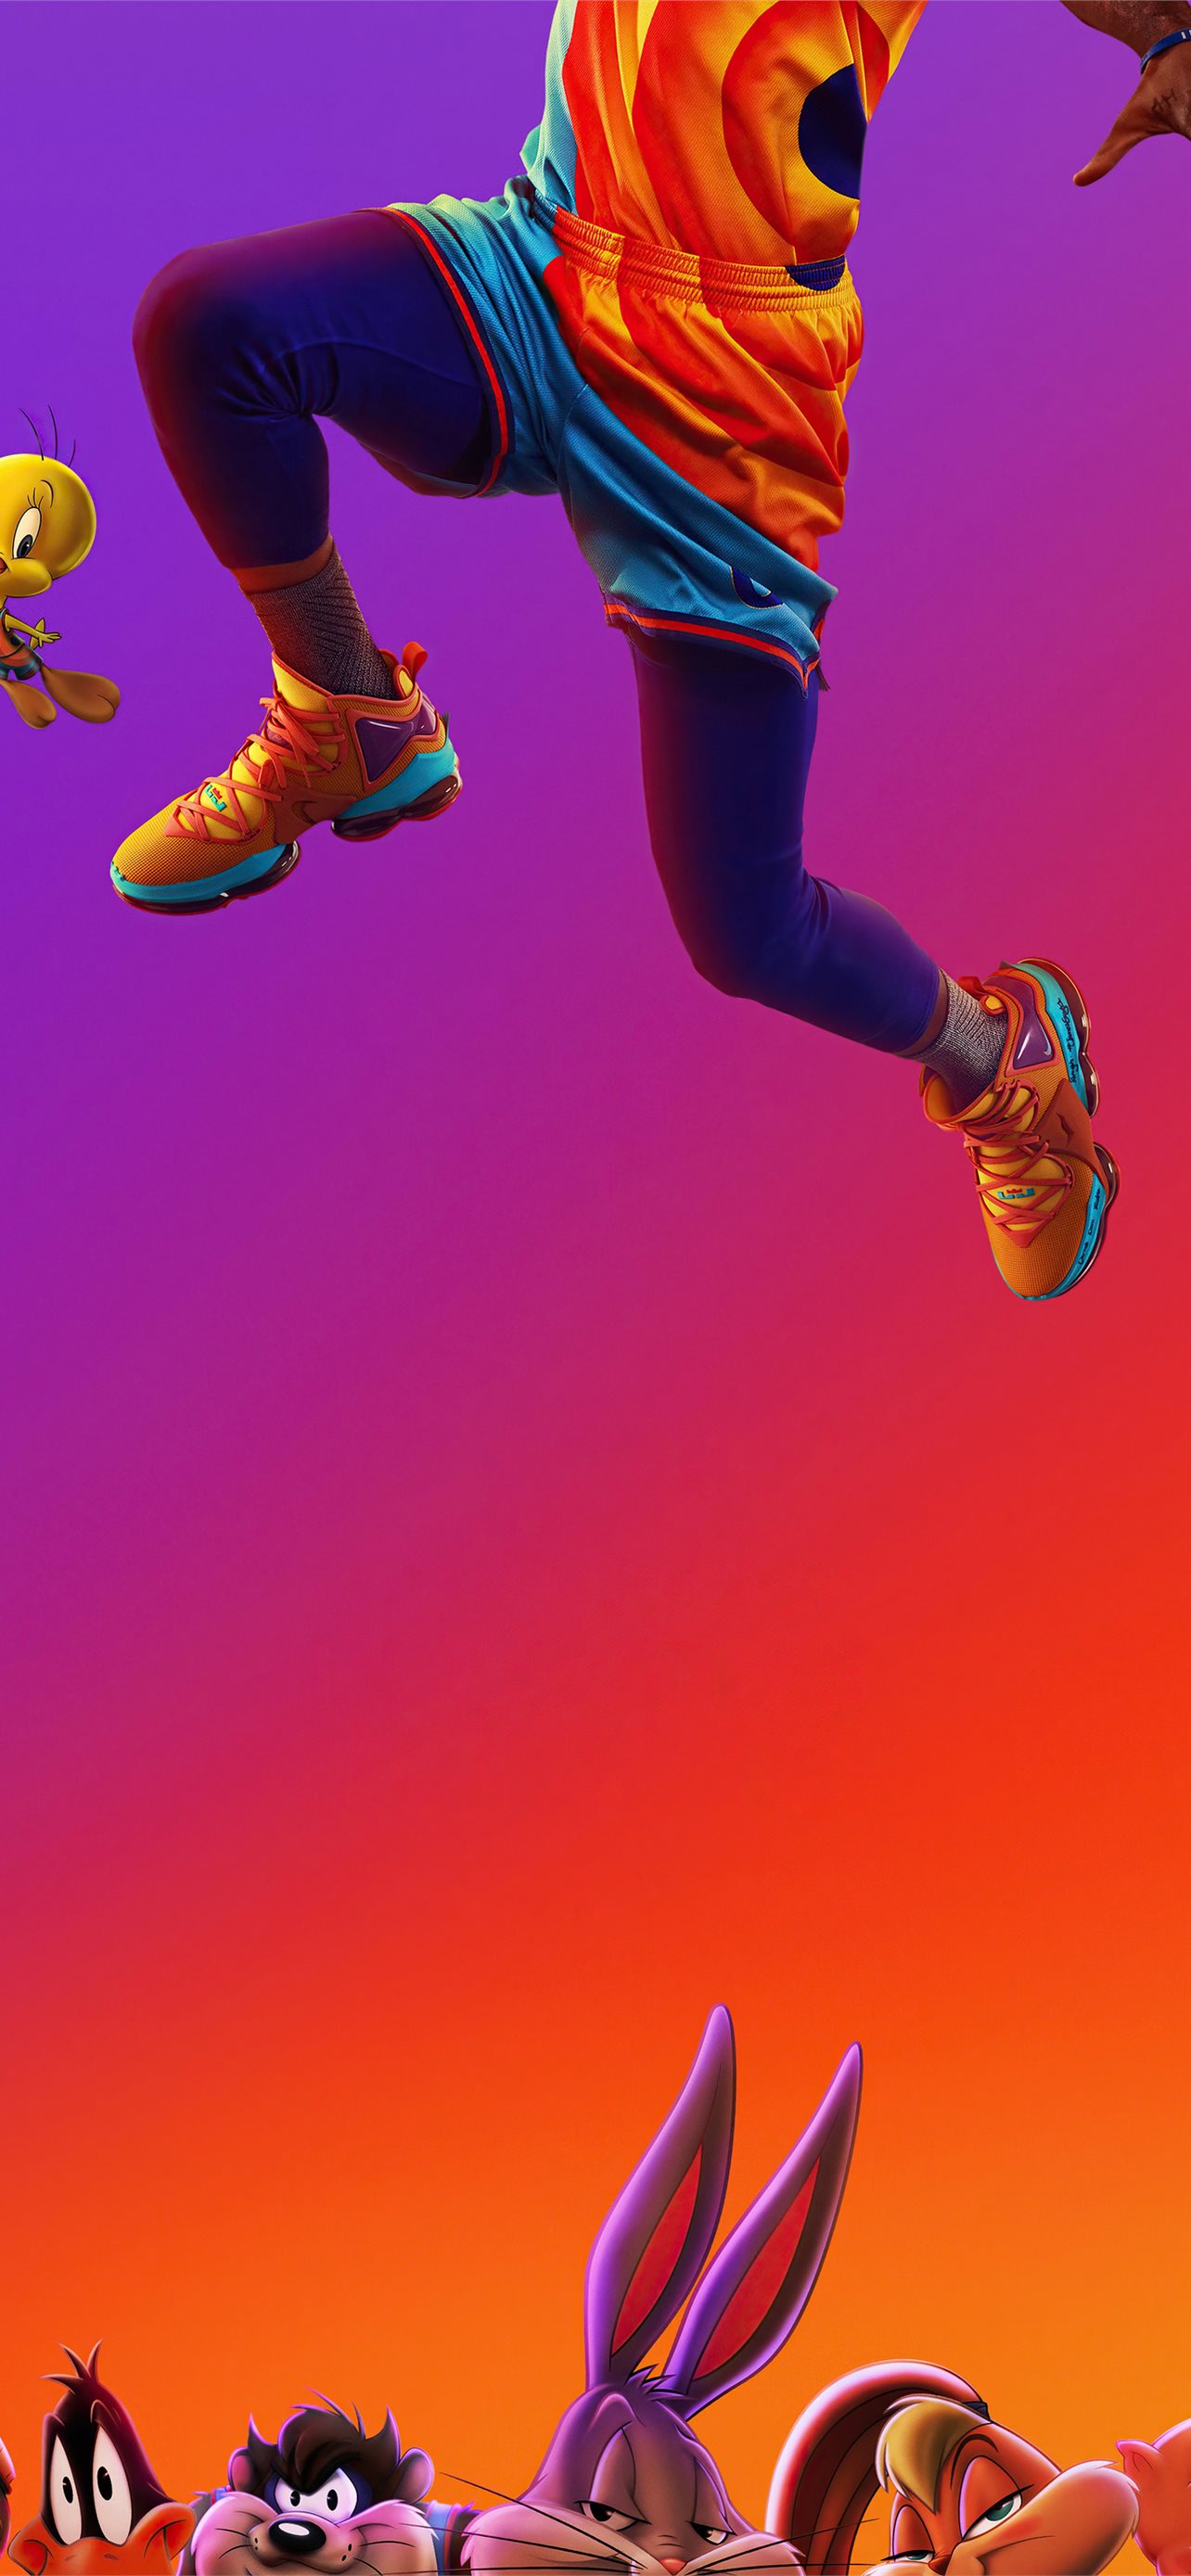 space jam a new legacy movie 5k iPhone wallpaper 